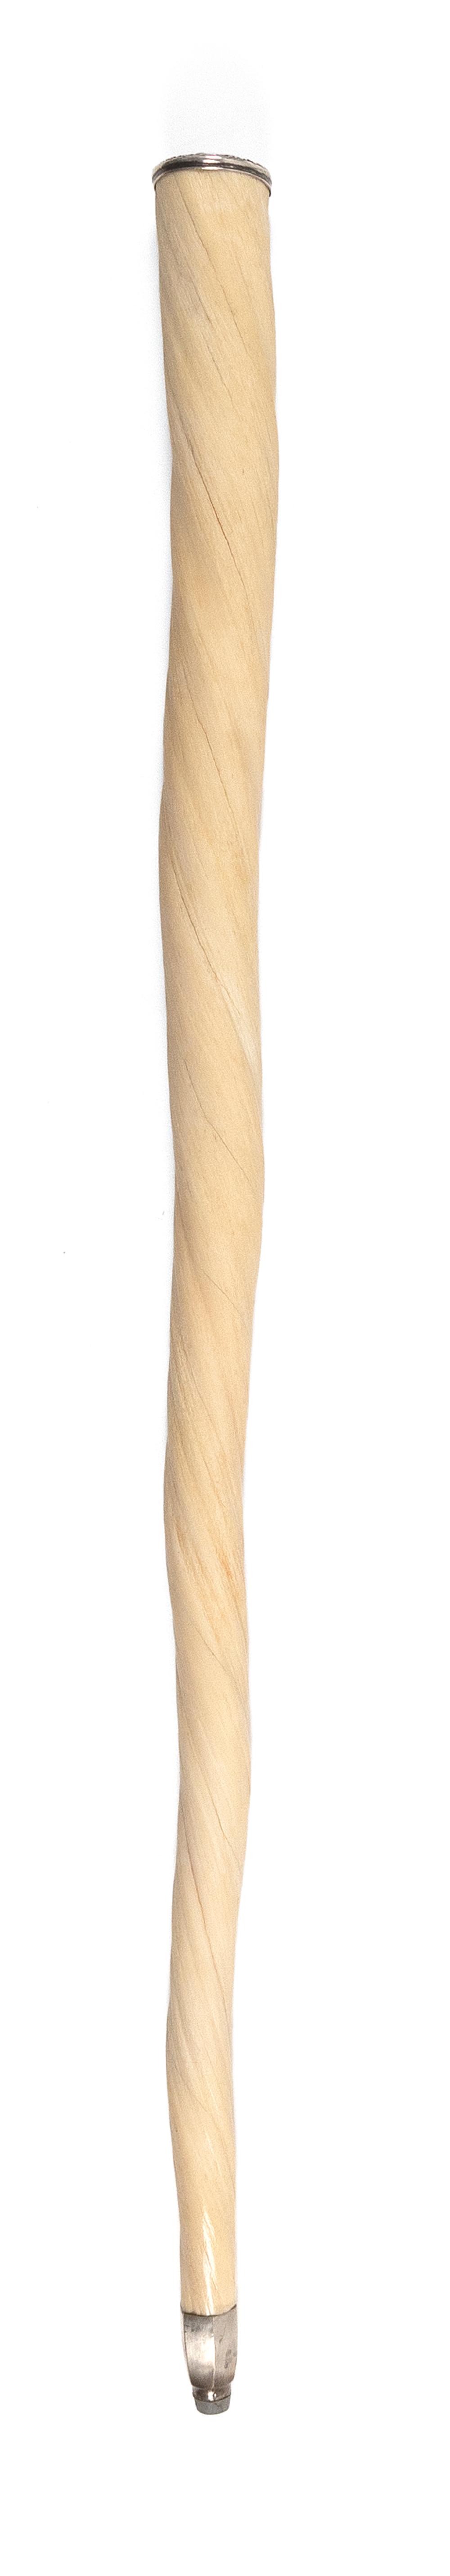 NARWHAL TUSK CANE WITH STERLING 34c67c